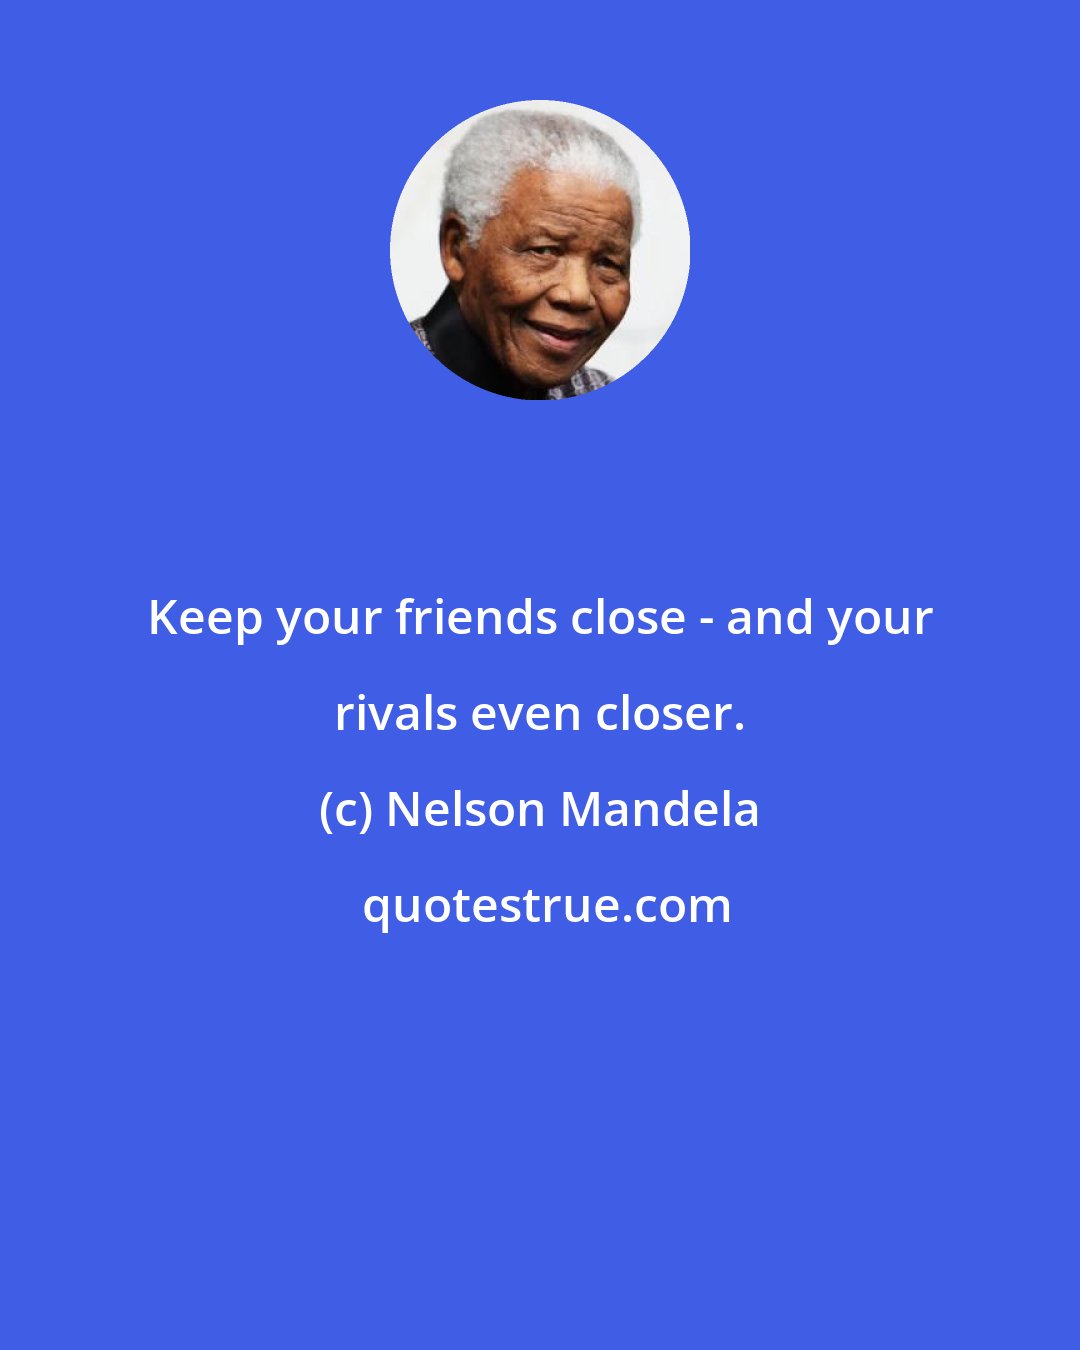 Nelson Mandela: Keep your friends close - and your rivals even closer.